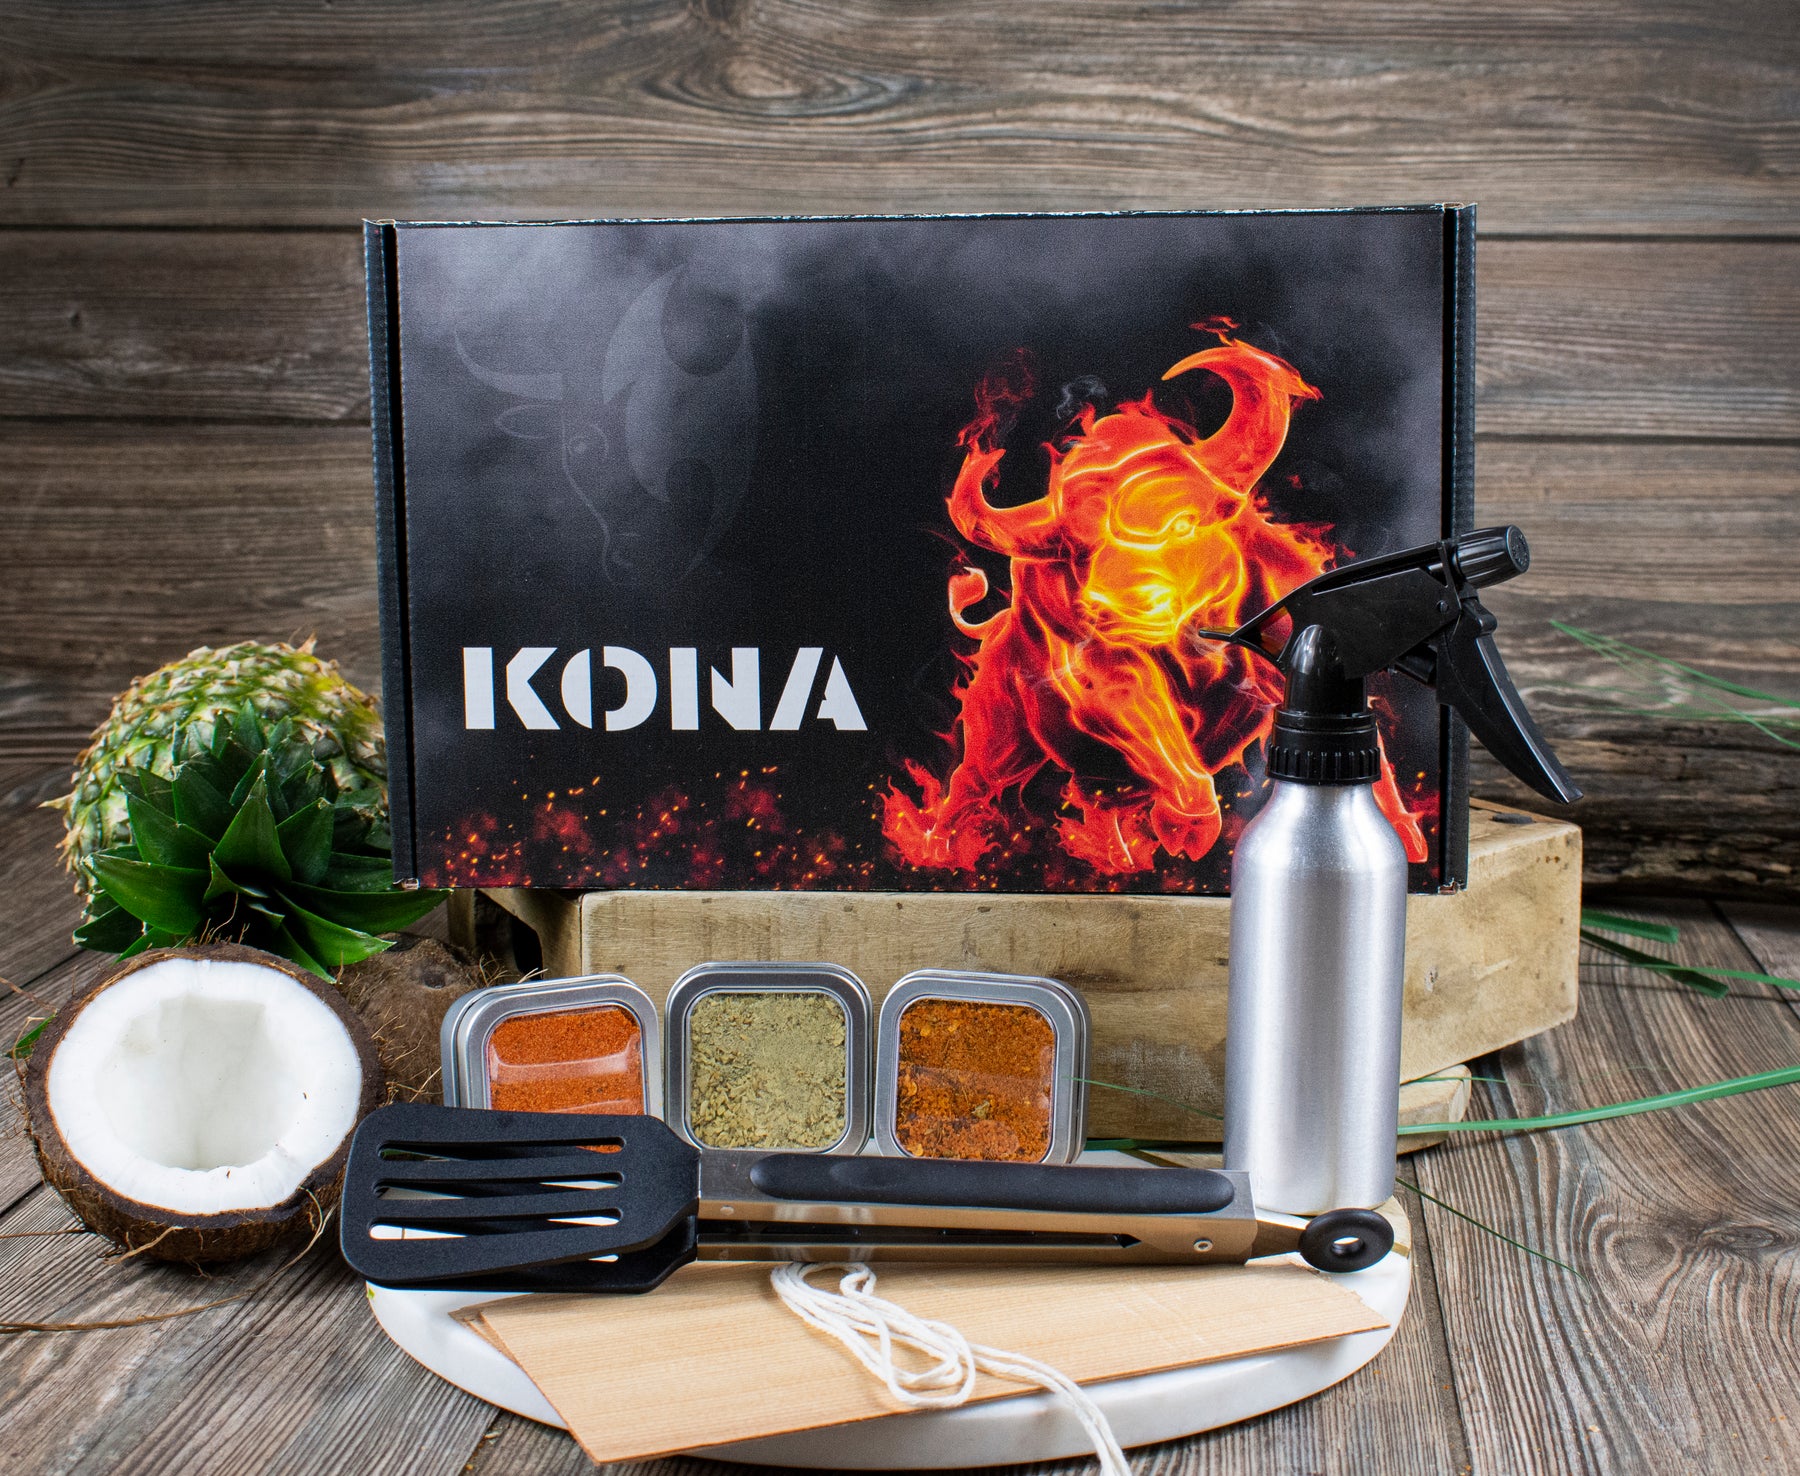 Kona Grilled Pacific Grillers Bundle Box